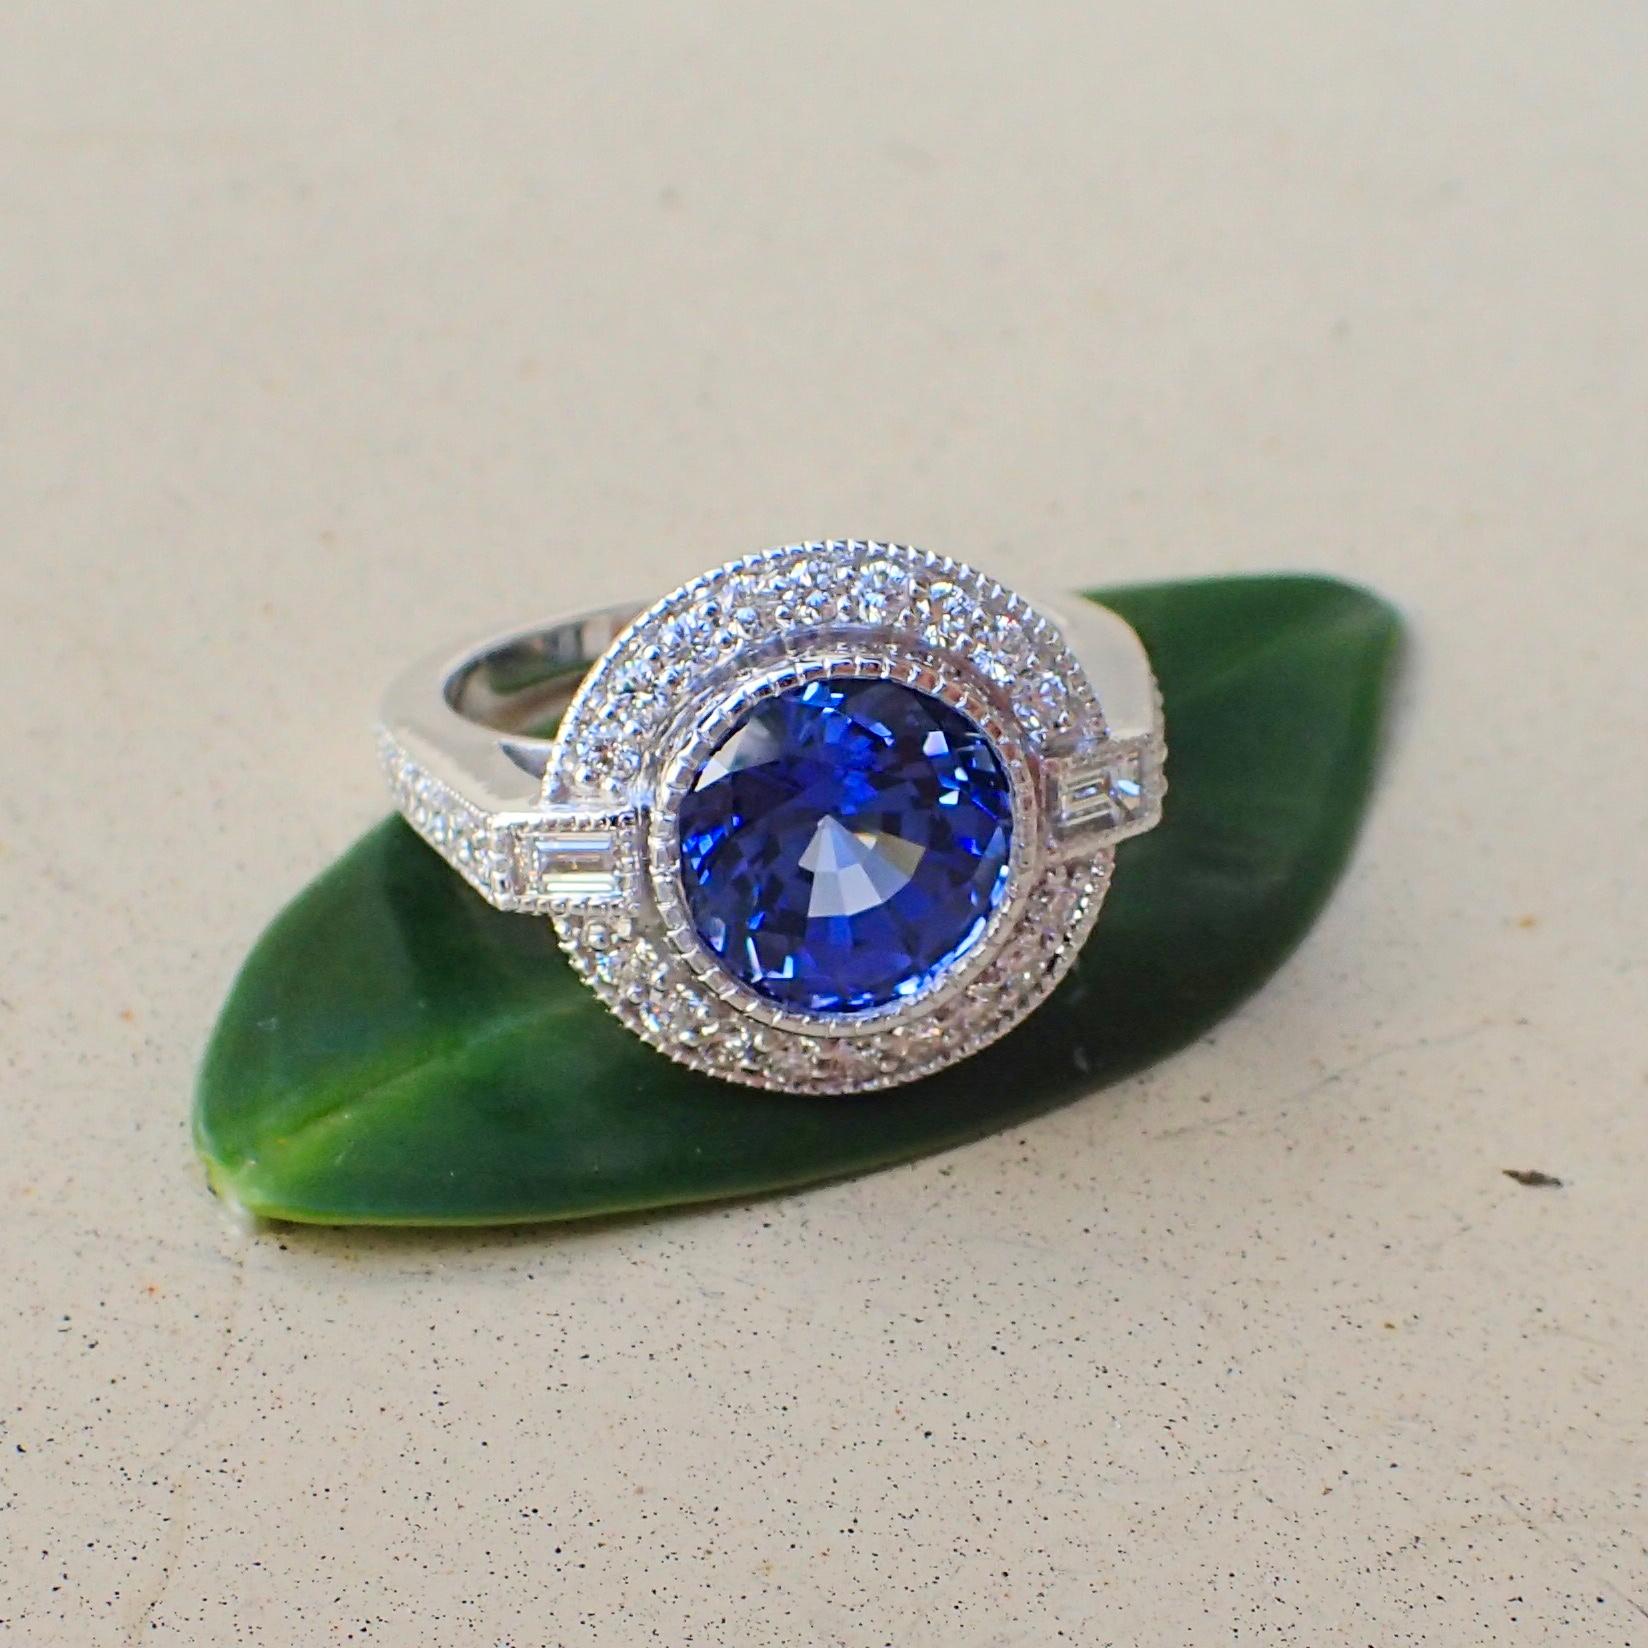 Women's 18k White Gold Ring with 3.93 carat Chatham Sapphire and 0.61 carats of Diamond For Sale